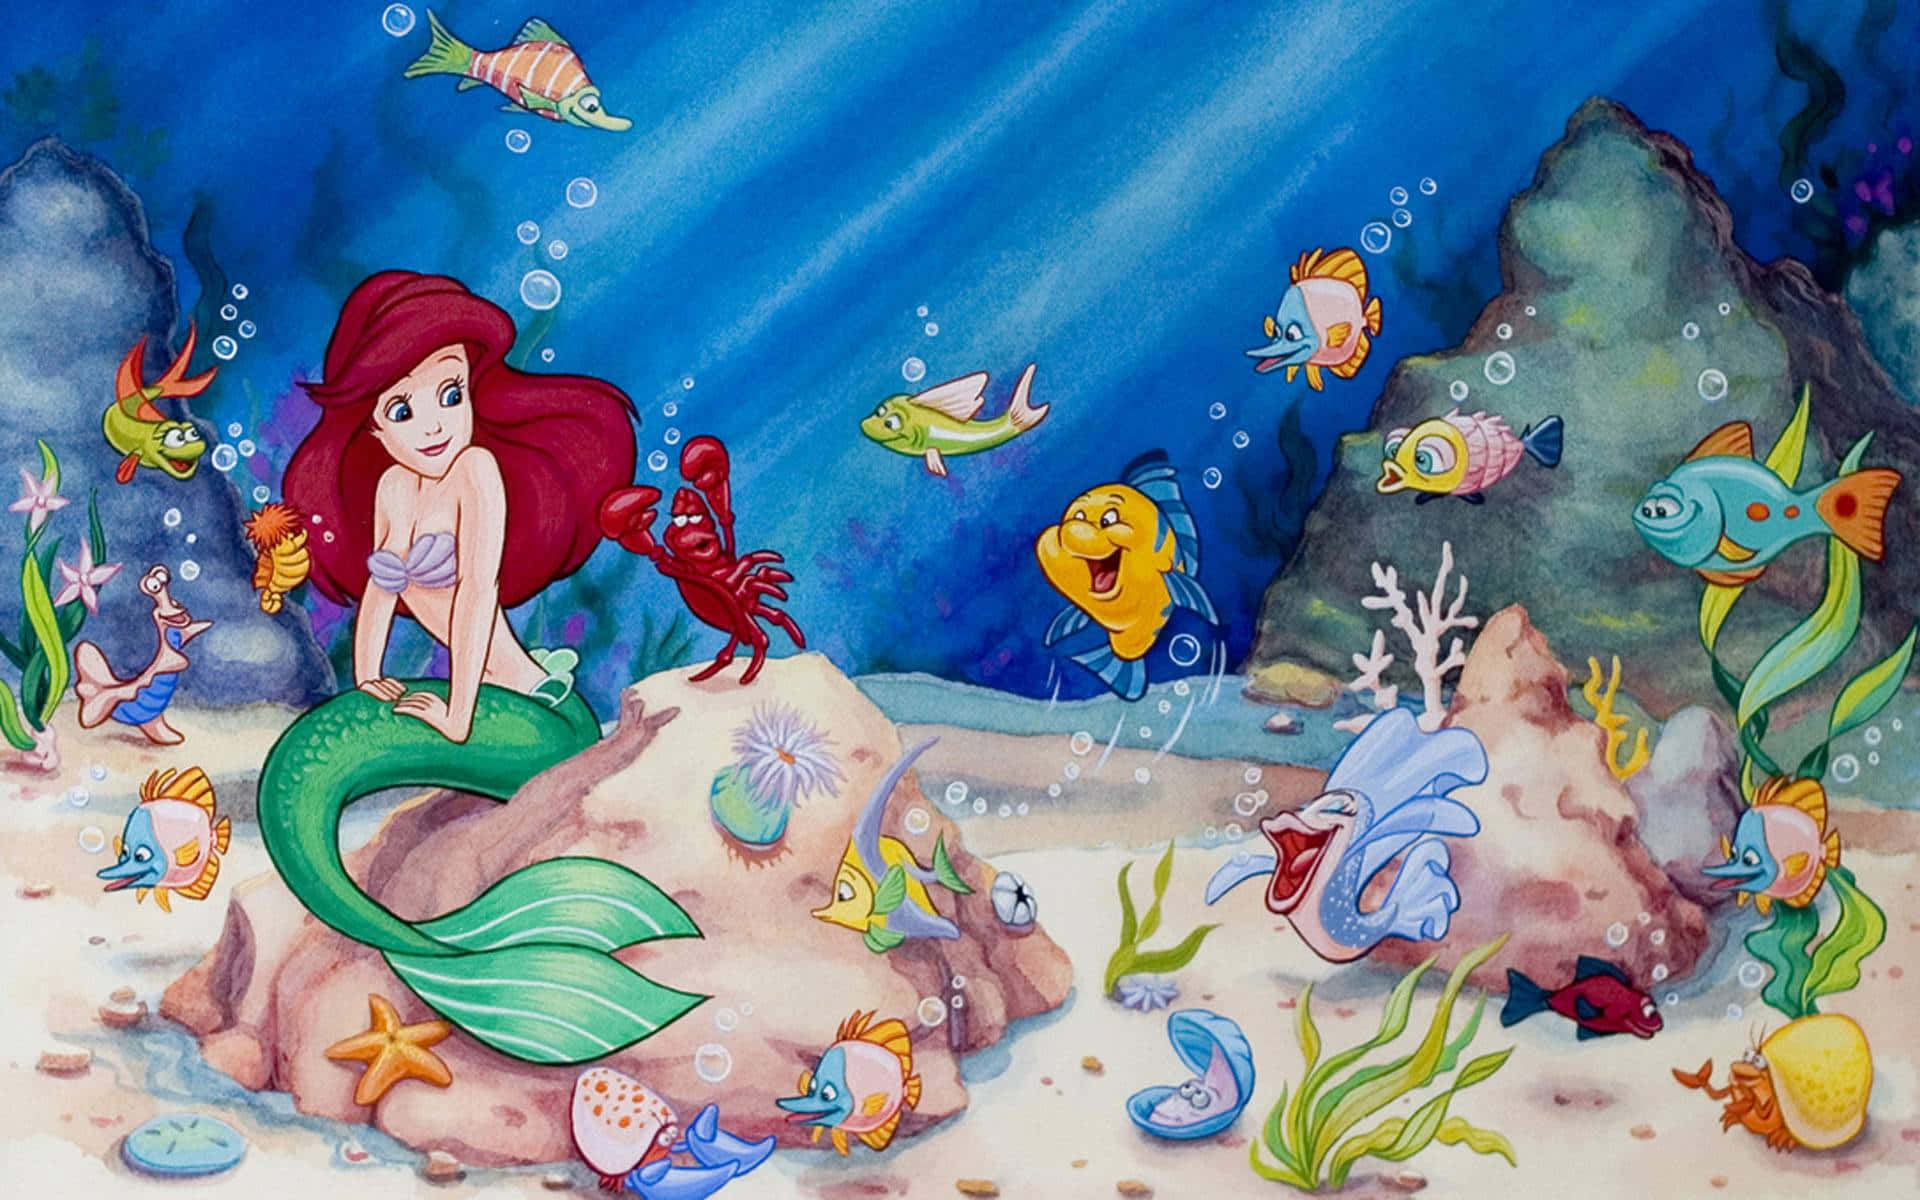 A beautiful dream of undiscovered adventures with the magical Little Mermaid. Wallpaper